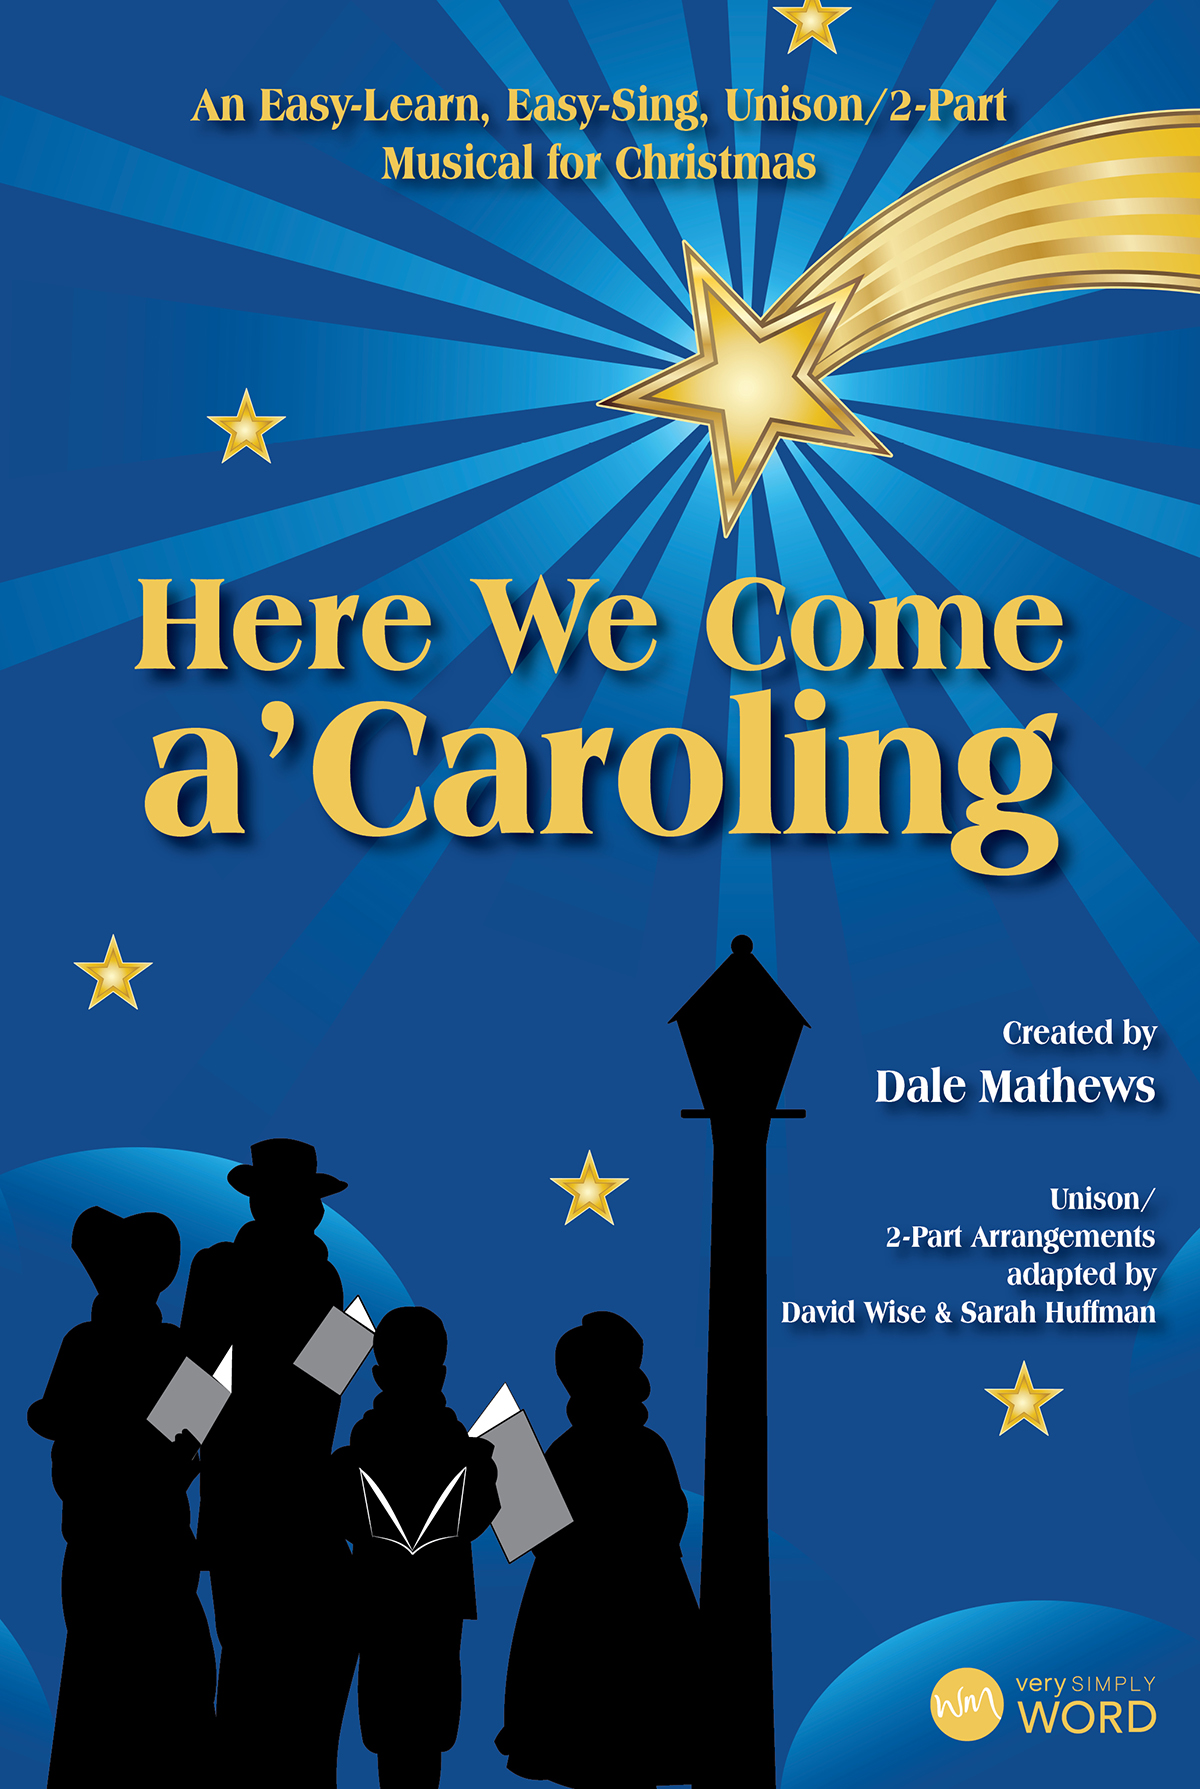 Here We Come a'Caroling